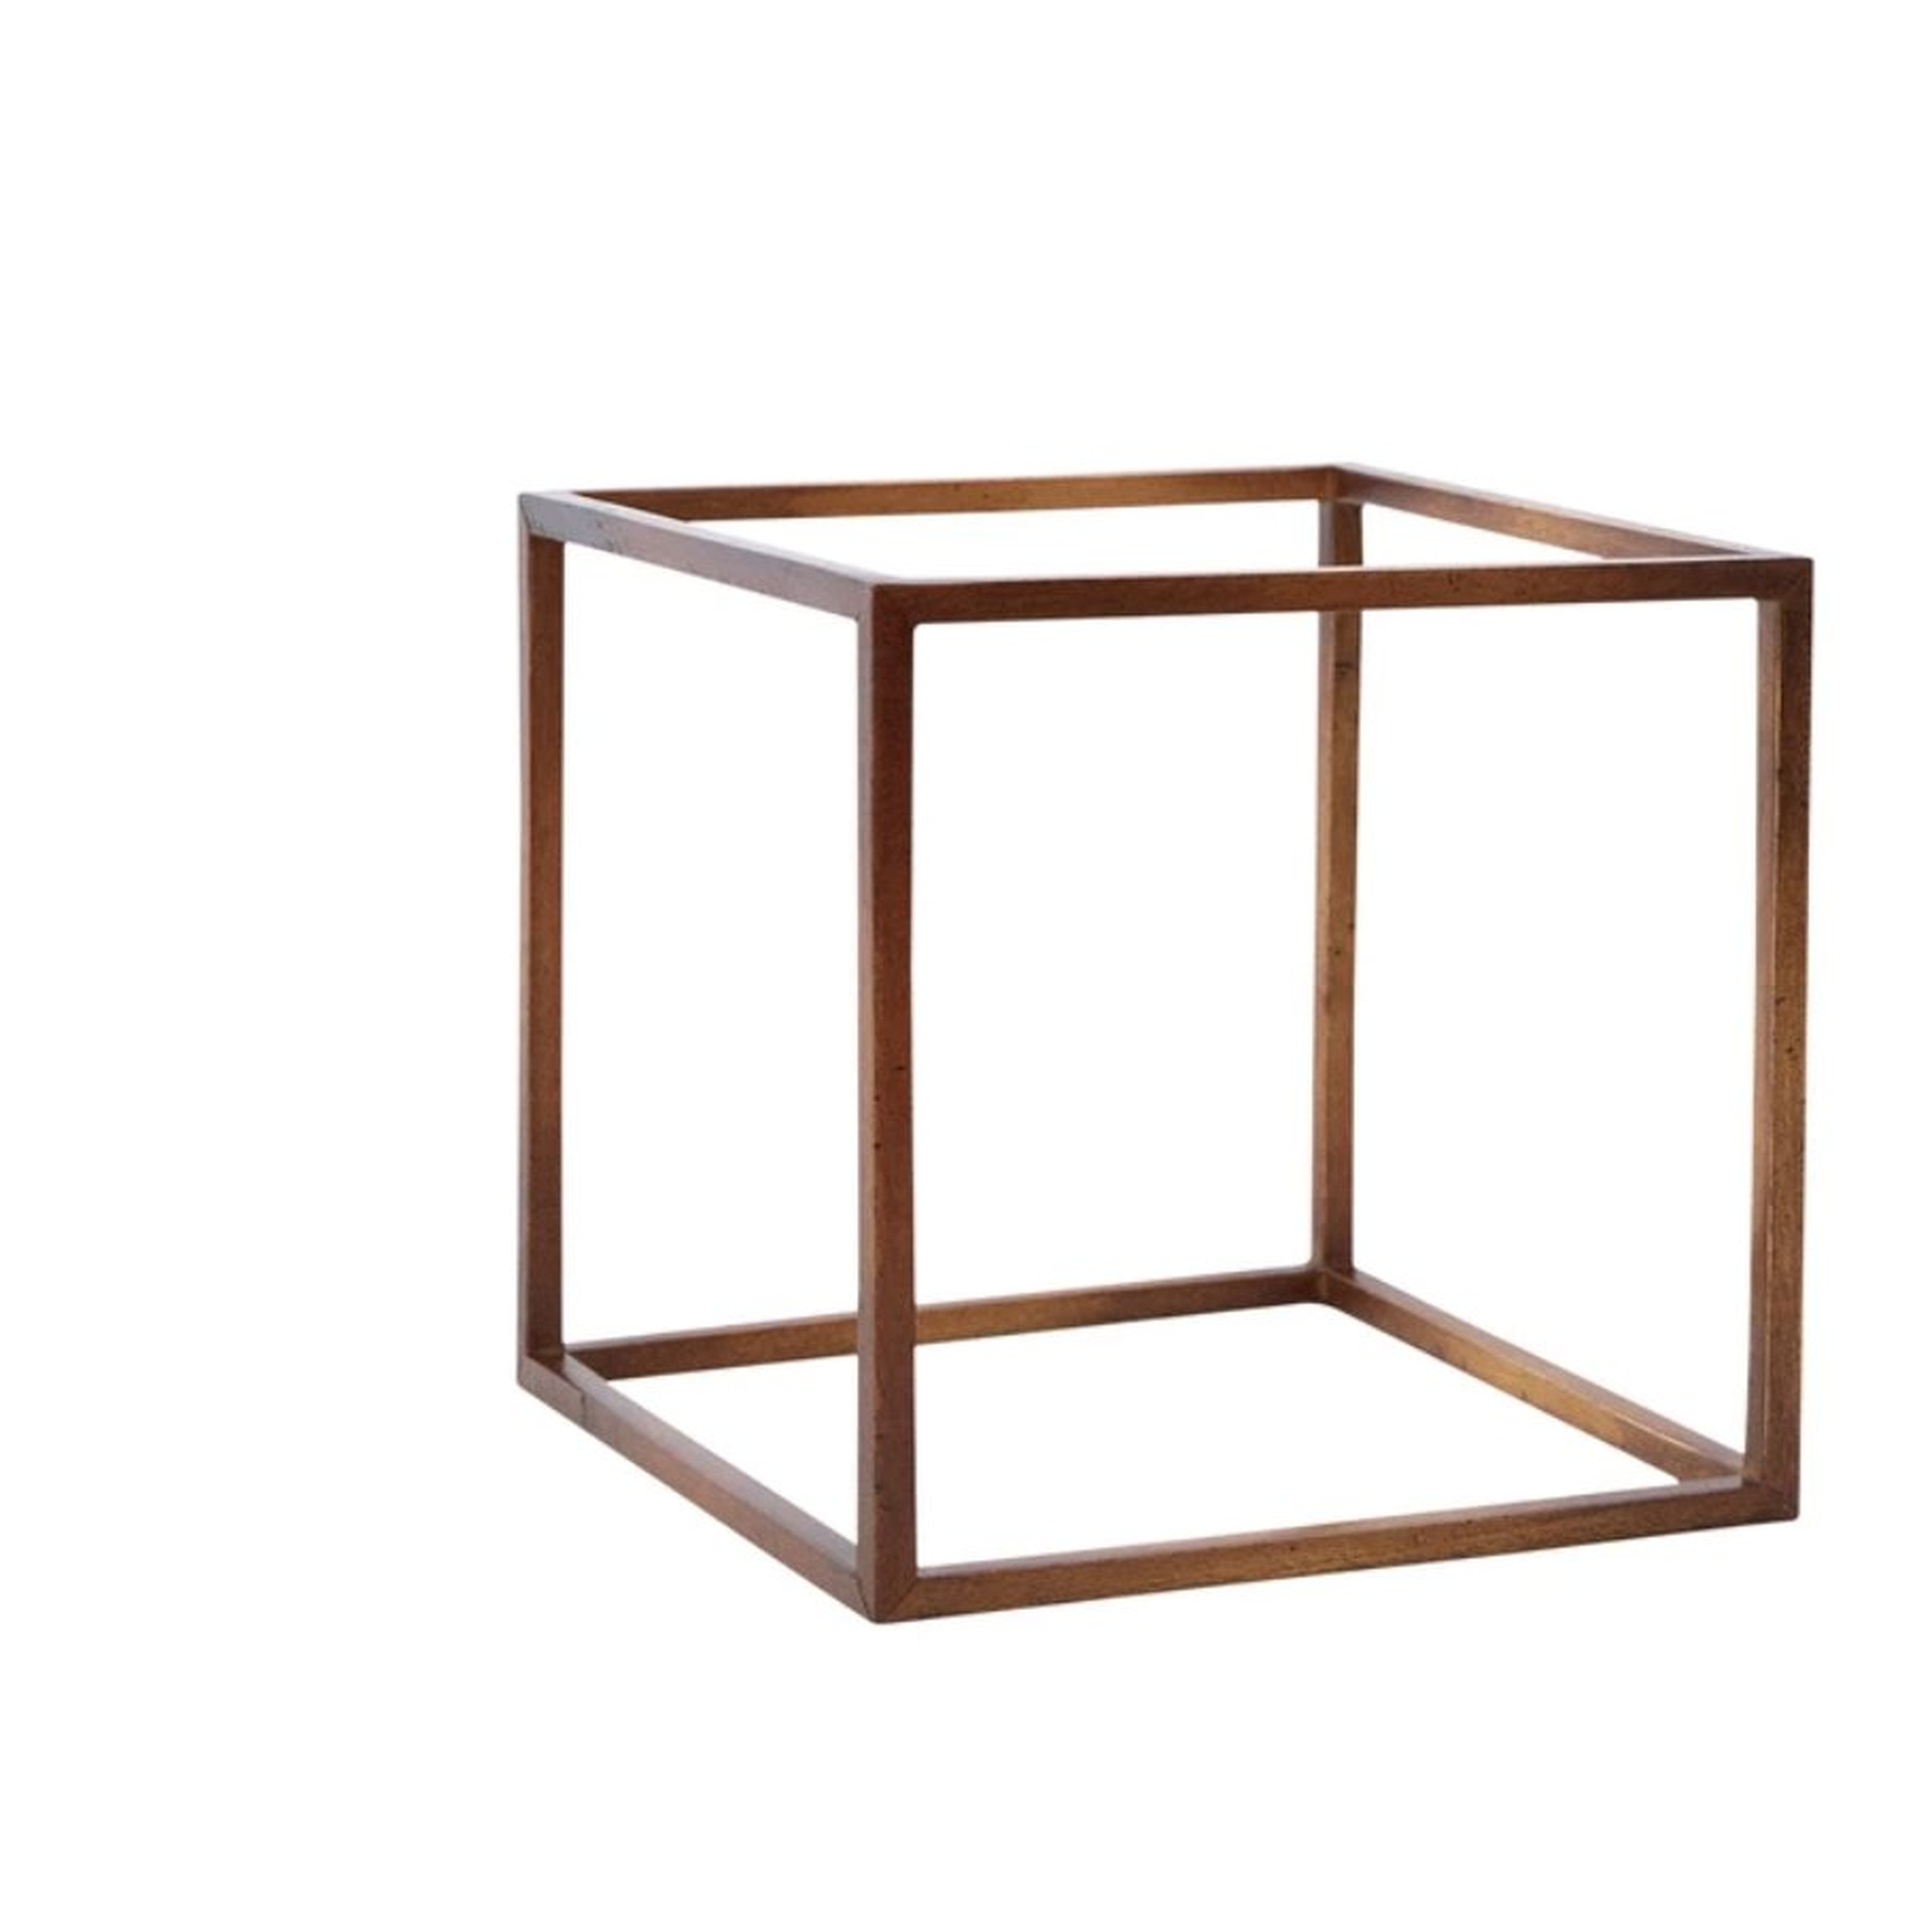 HOLLOW CUBE OBJECT - McGee & Co.